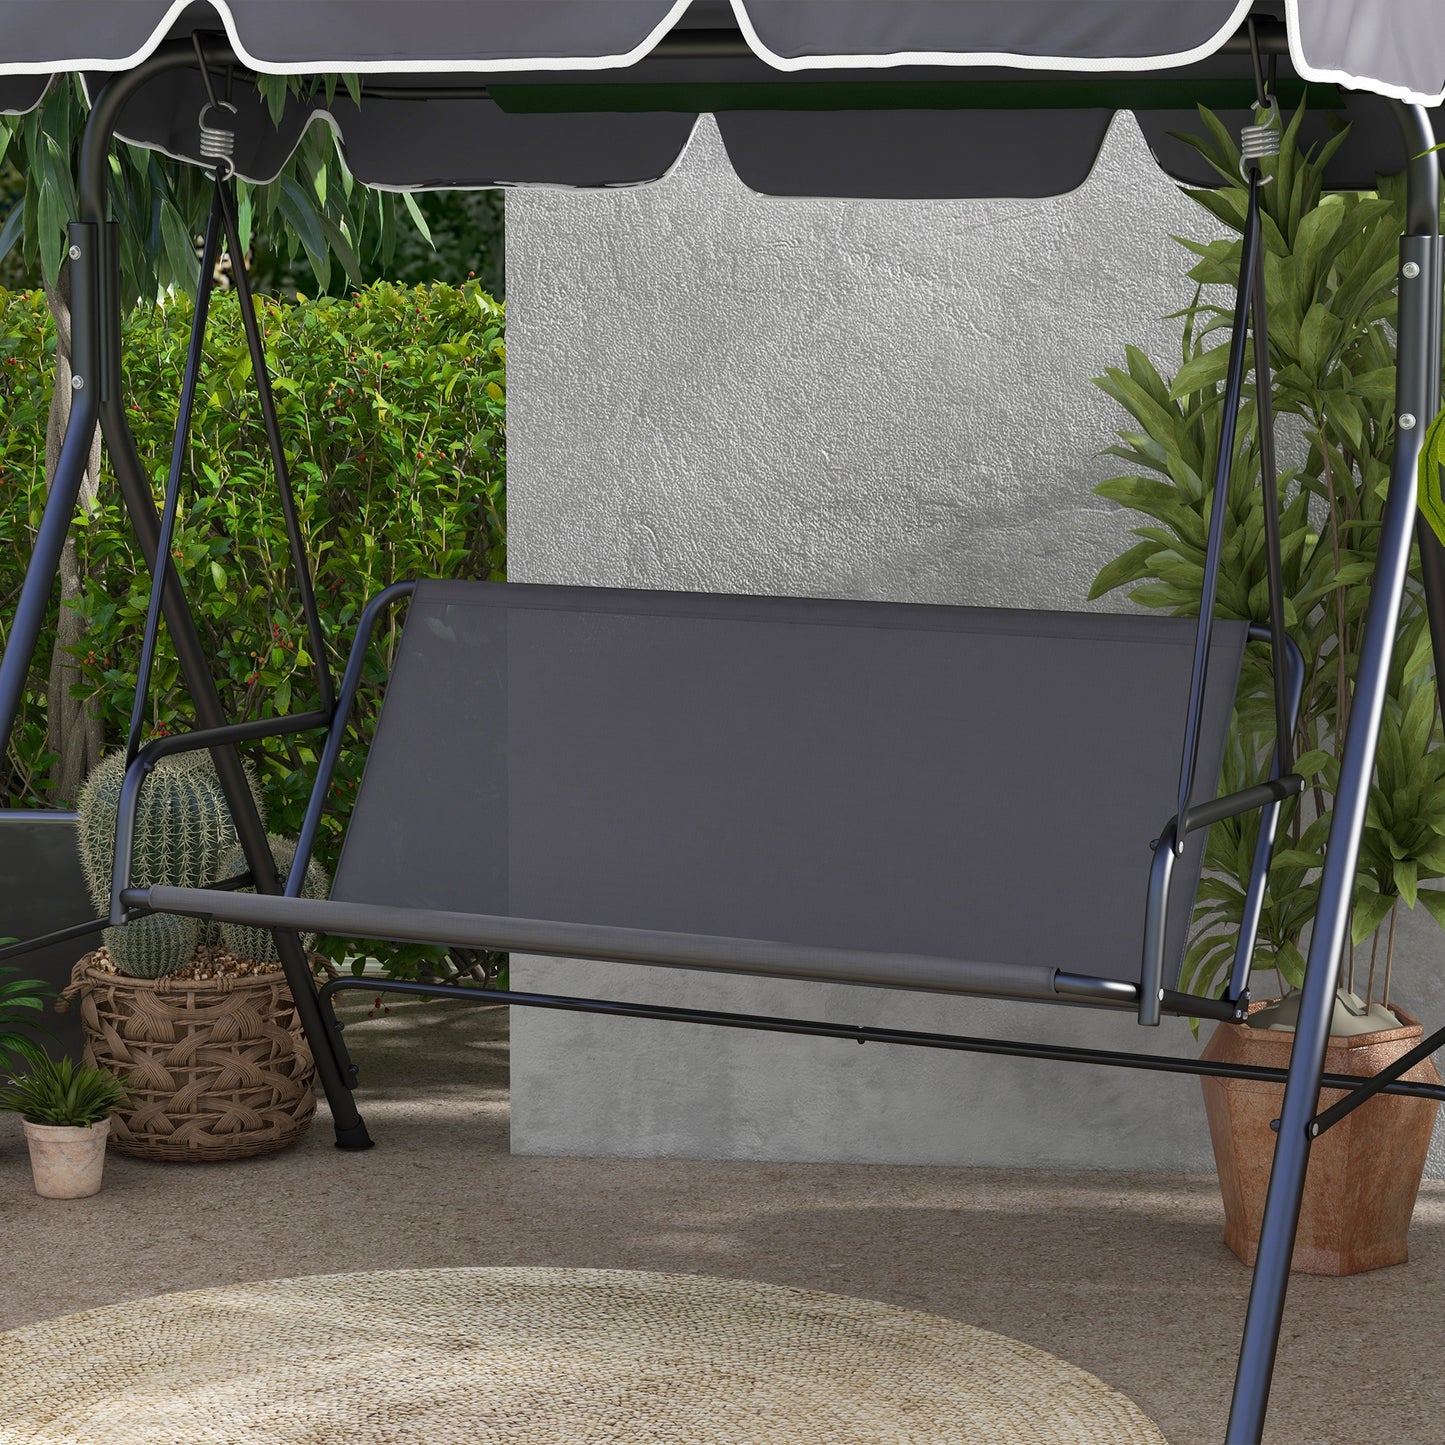 Outsunny Garden Swing Seat Cover Replacement, for 2 and 3 Seater Swing Bench, 115cm x 48cm x 48cm, Dark Grey